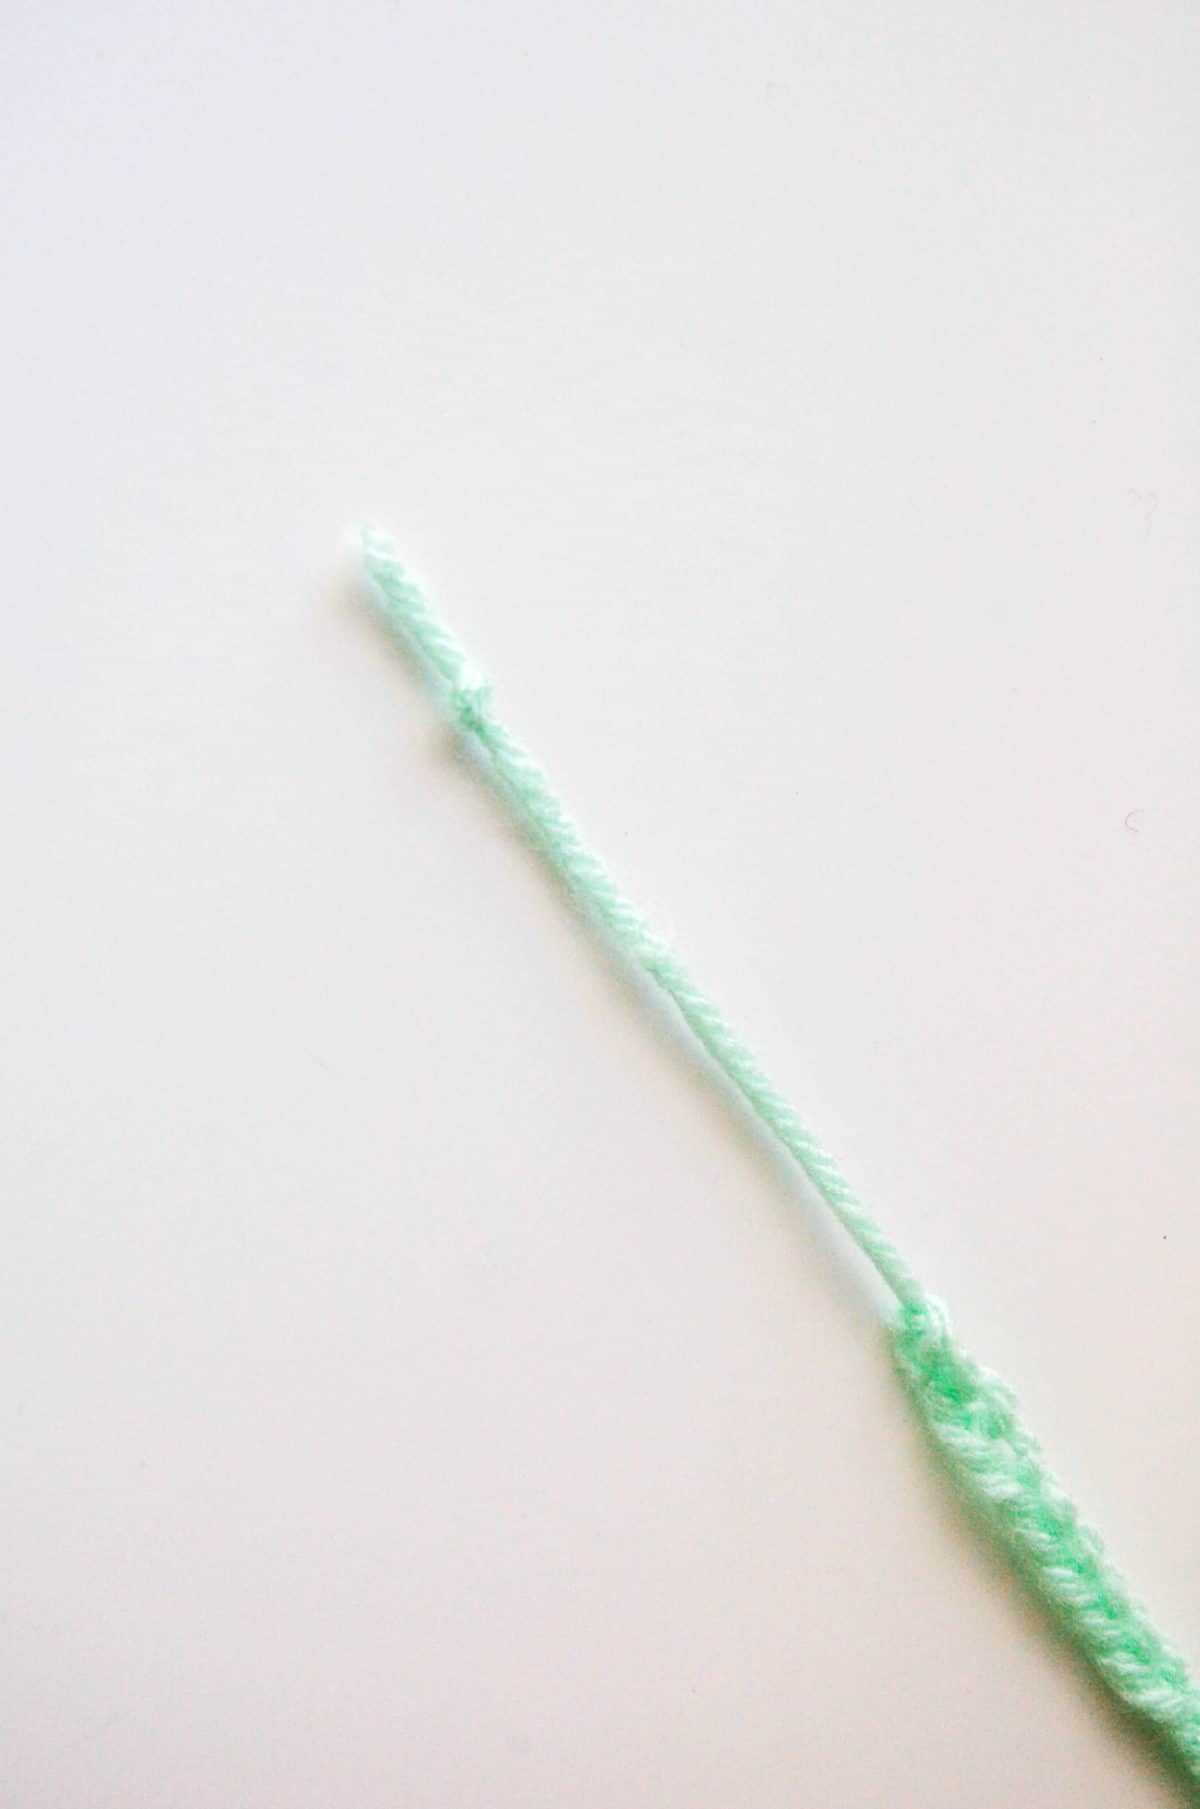 A piece of yarn with a knot at the end to make an adjustable bracelet.